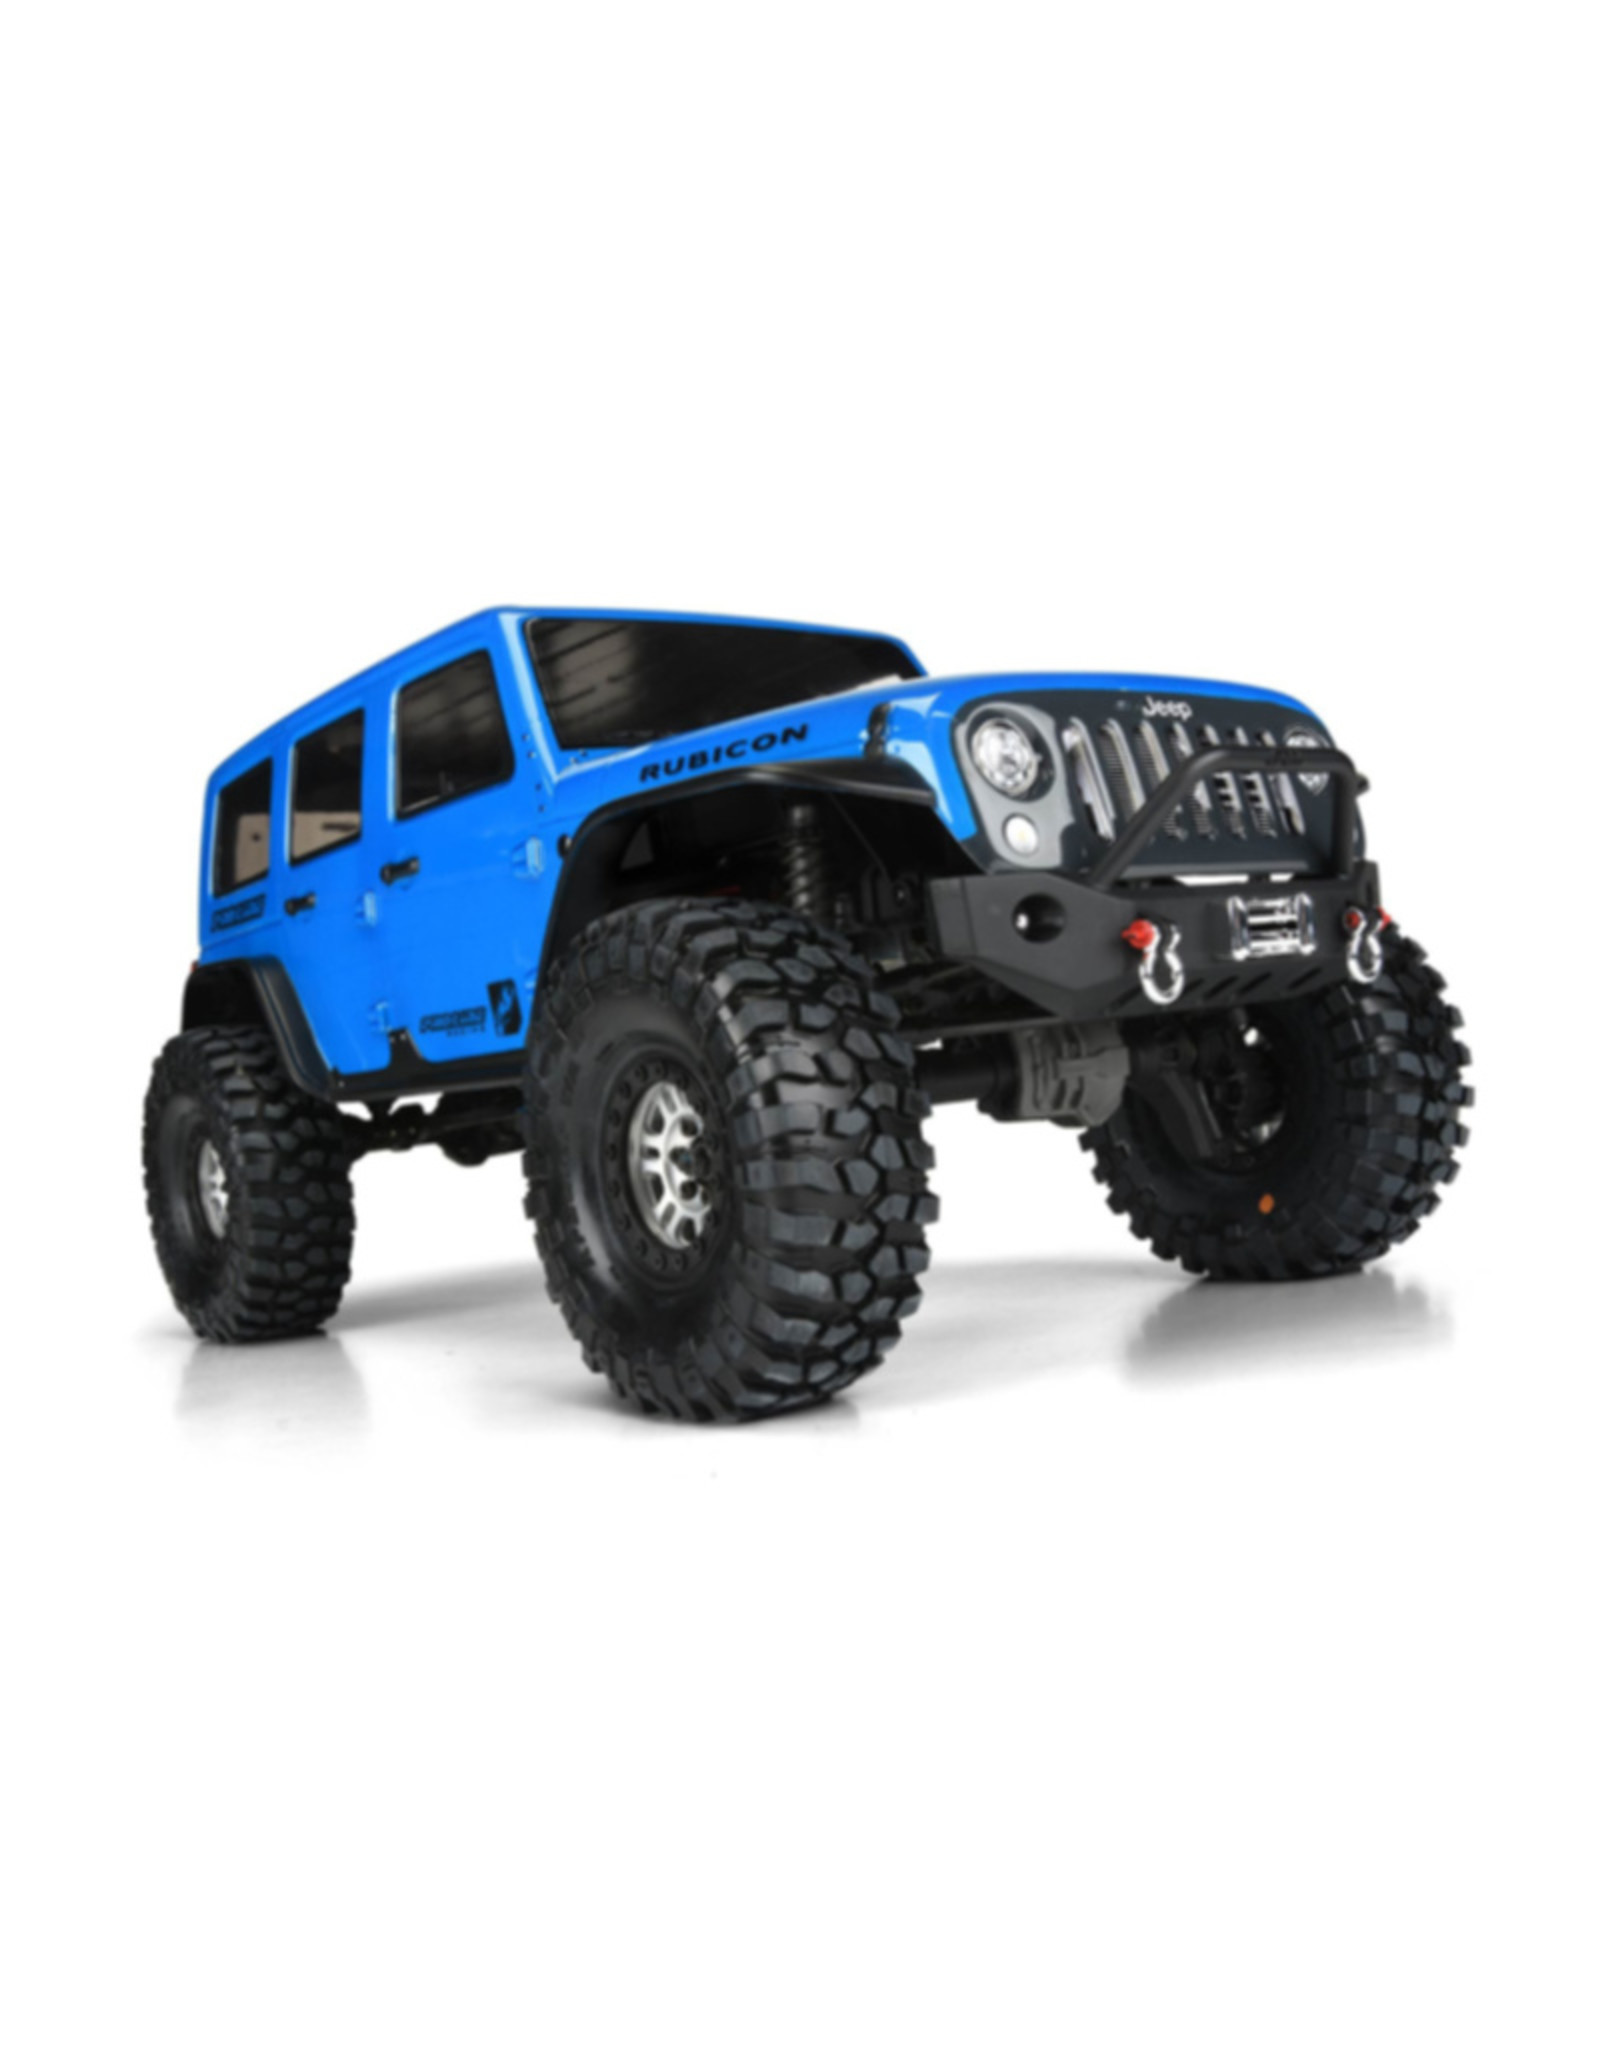 Pro-Line Racing PRO350200  Jeep Wrangler Unlimited Rubicon Clr Bdy: TRX-4